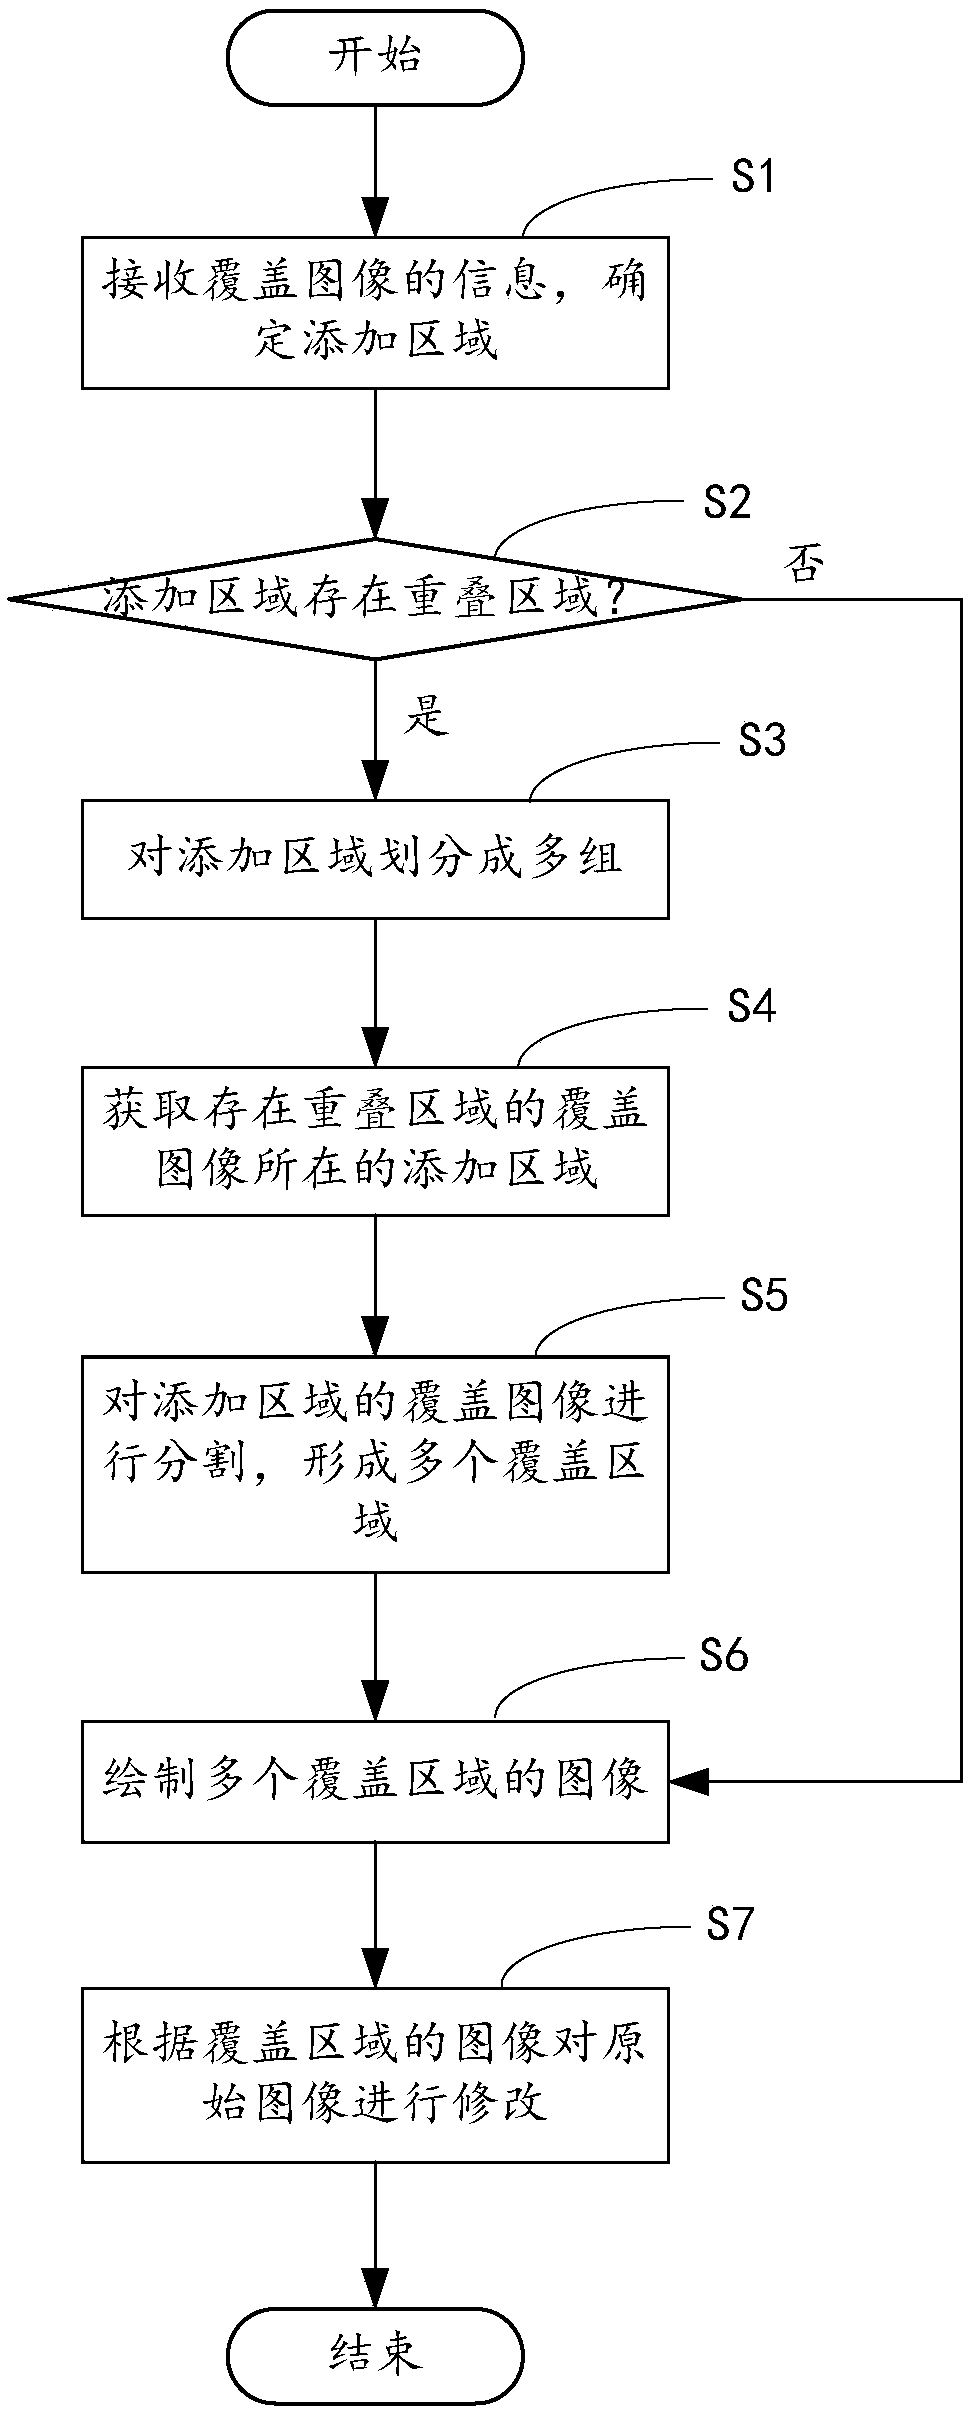 Video image processing method, computer device and computer readable storage medium